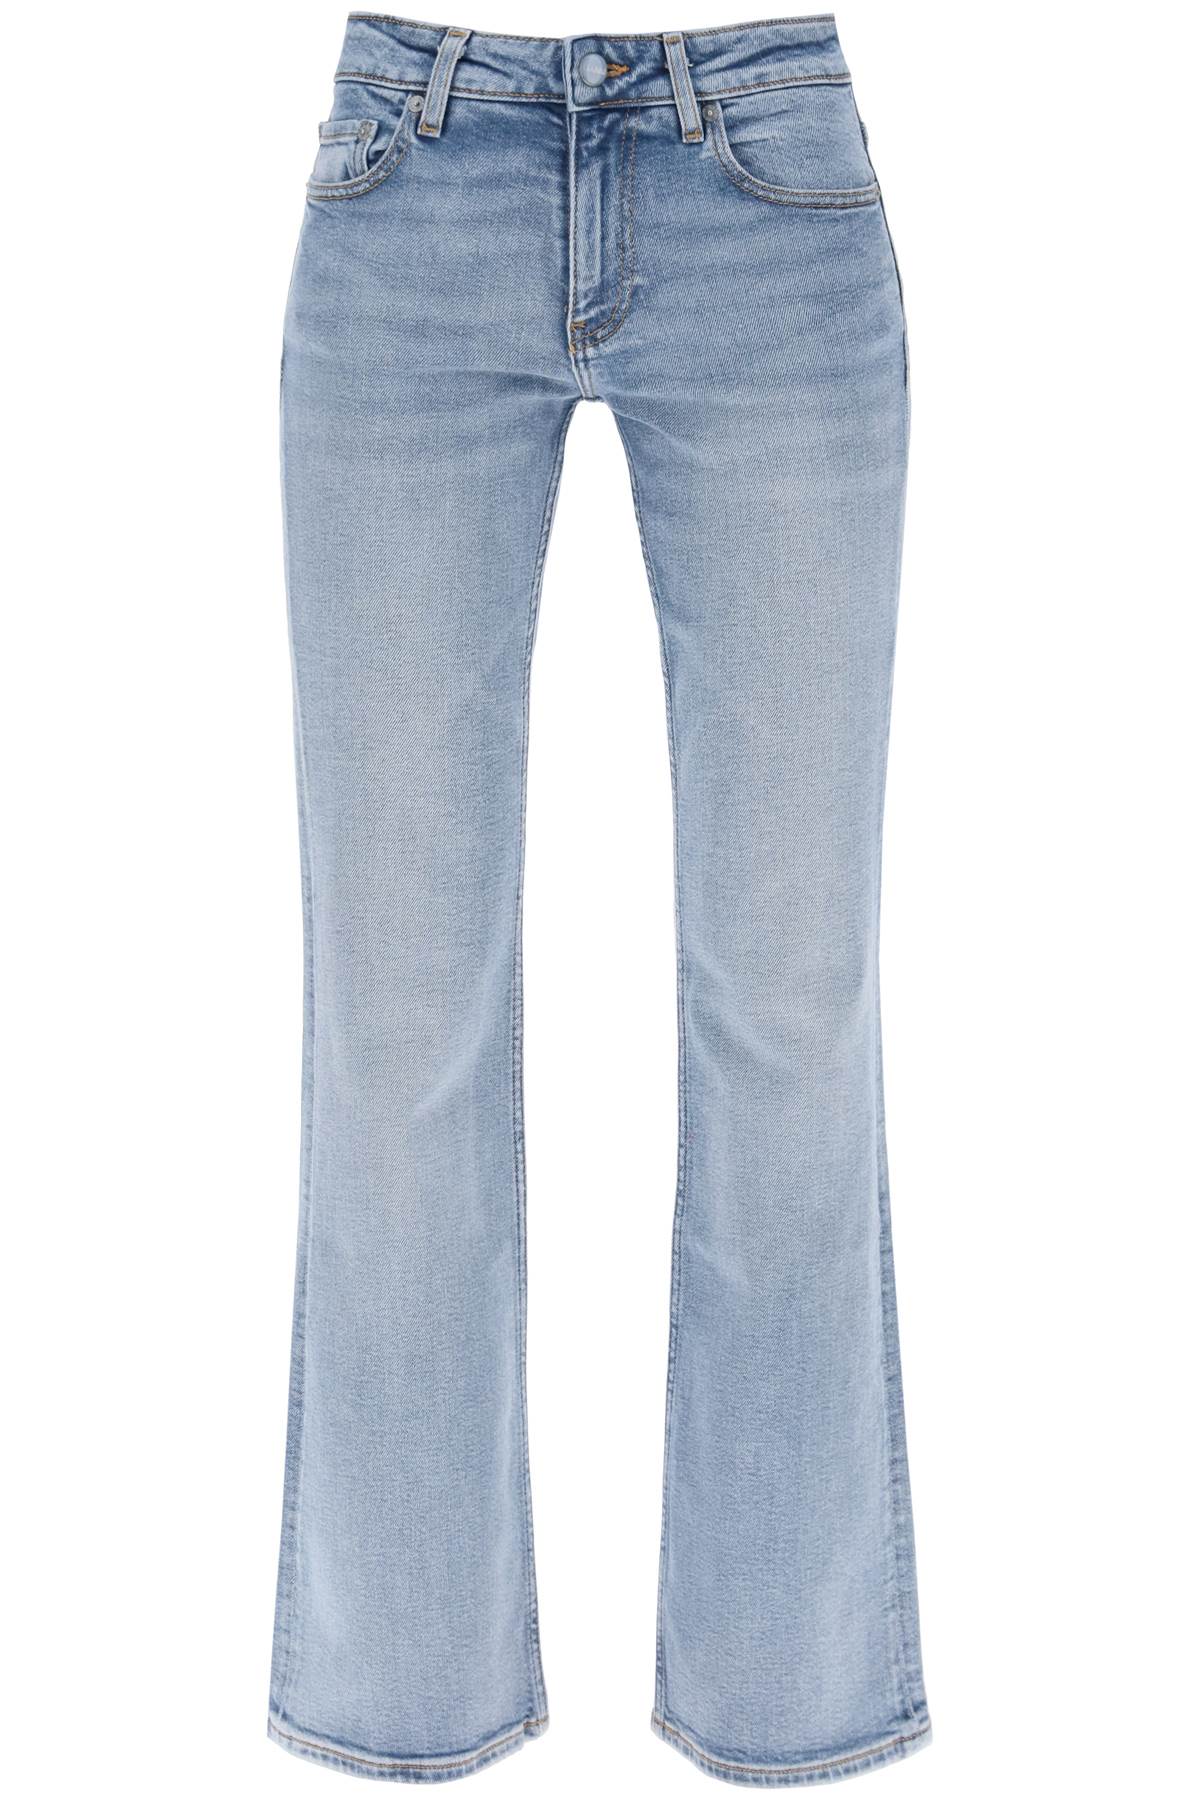 Shop Ganni Iry Jeans With Light Wash In Stone Washed